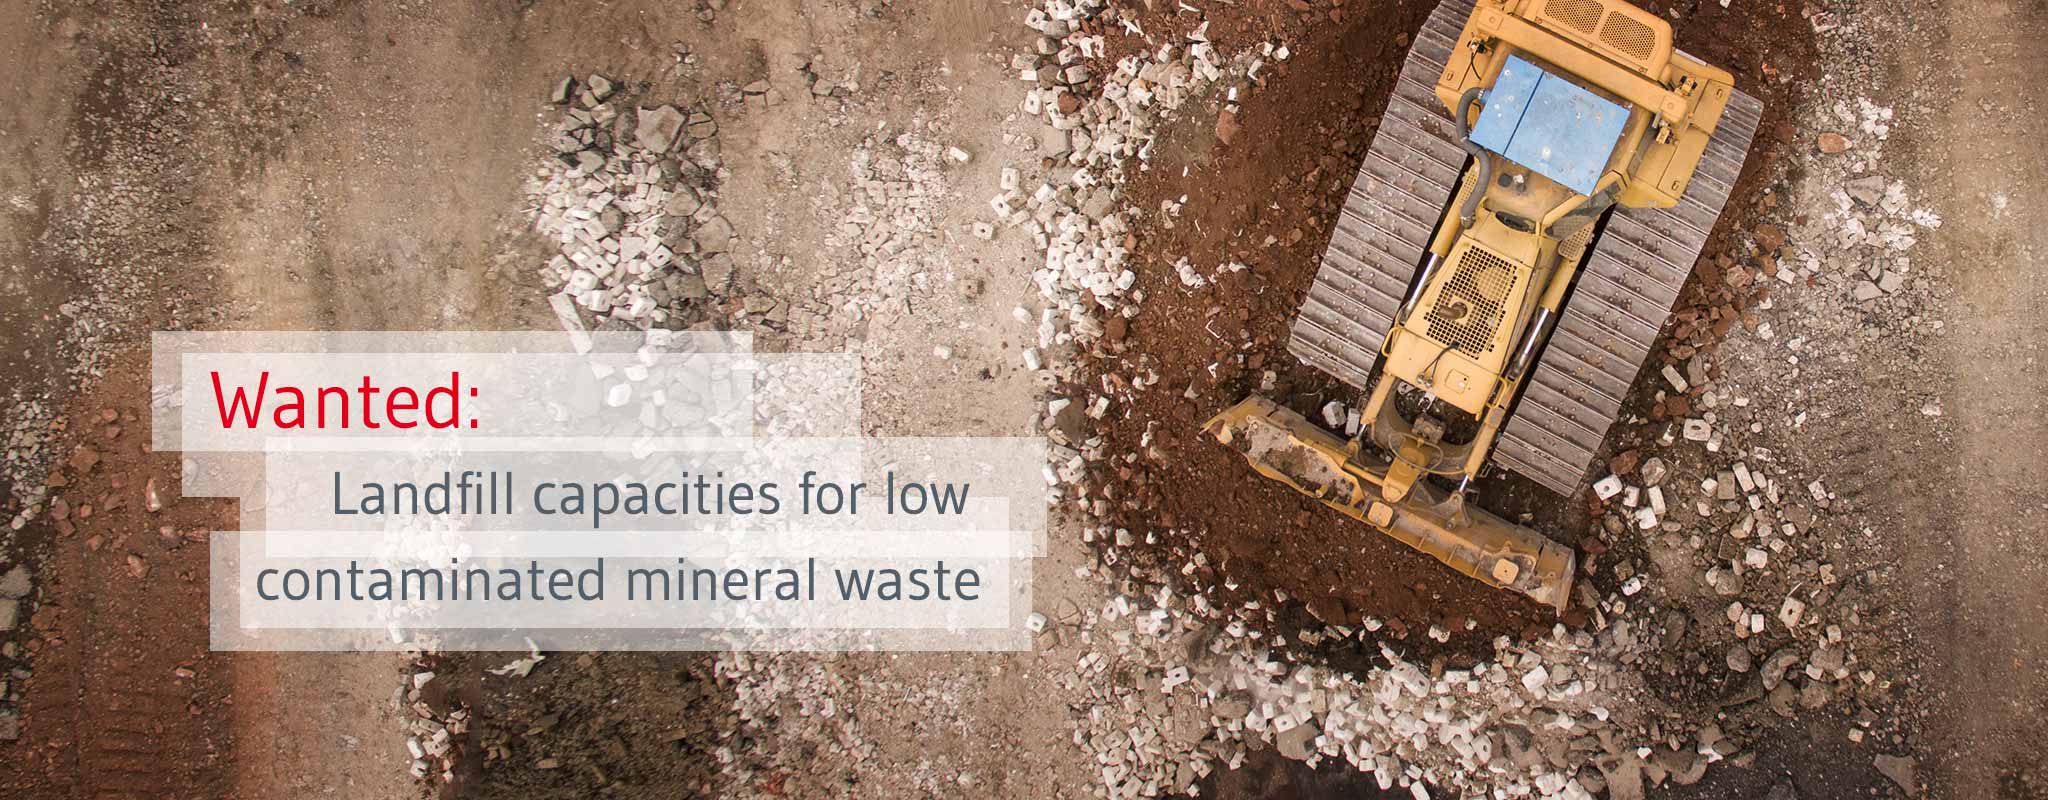 Jointly creating disposal capacities for mineral waste